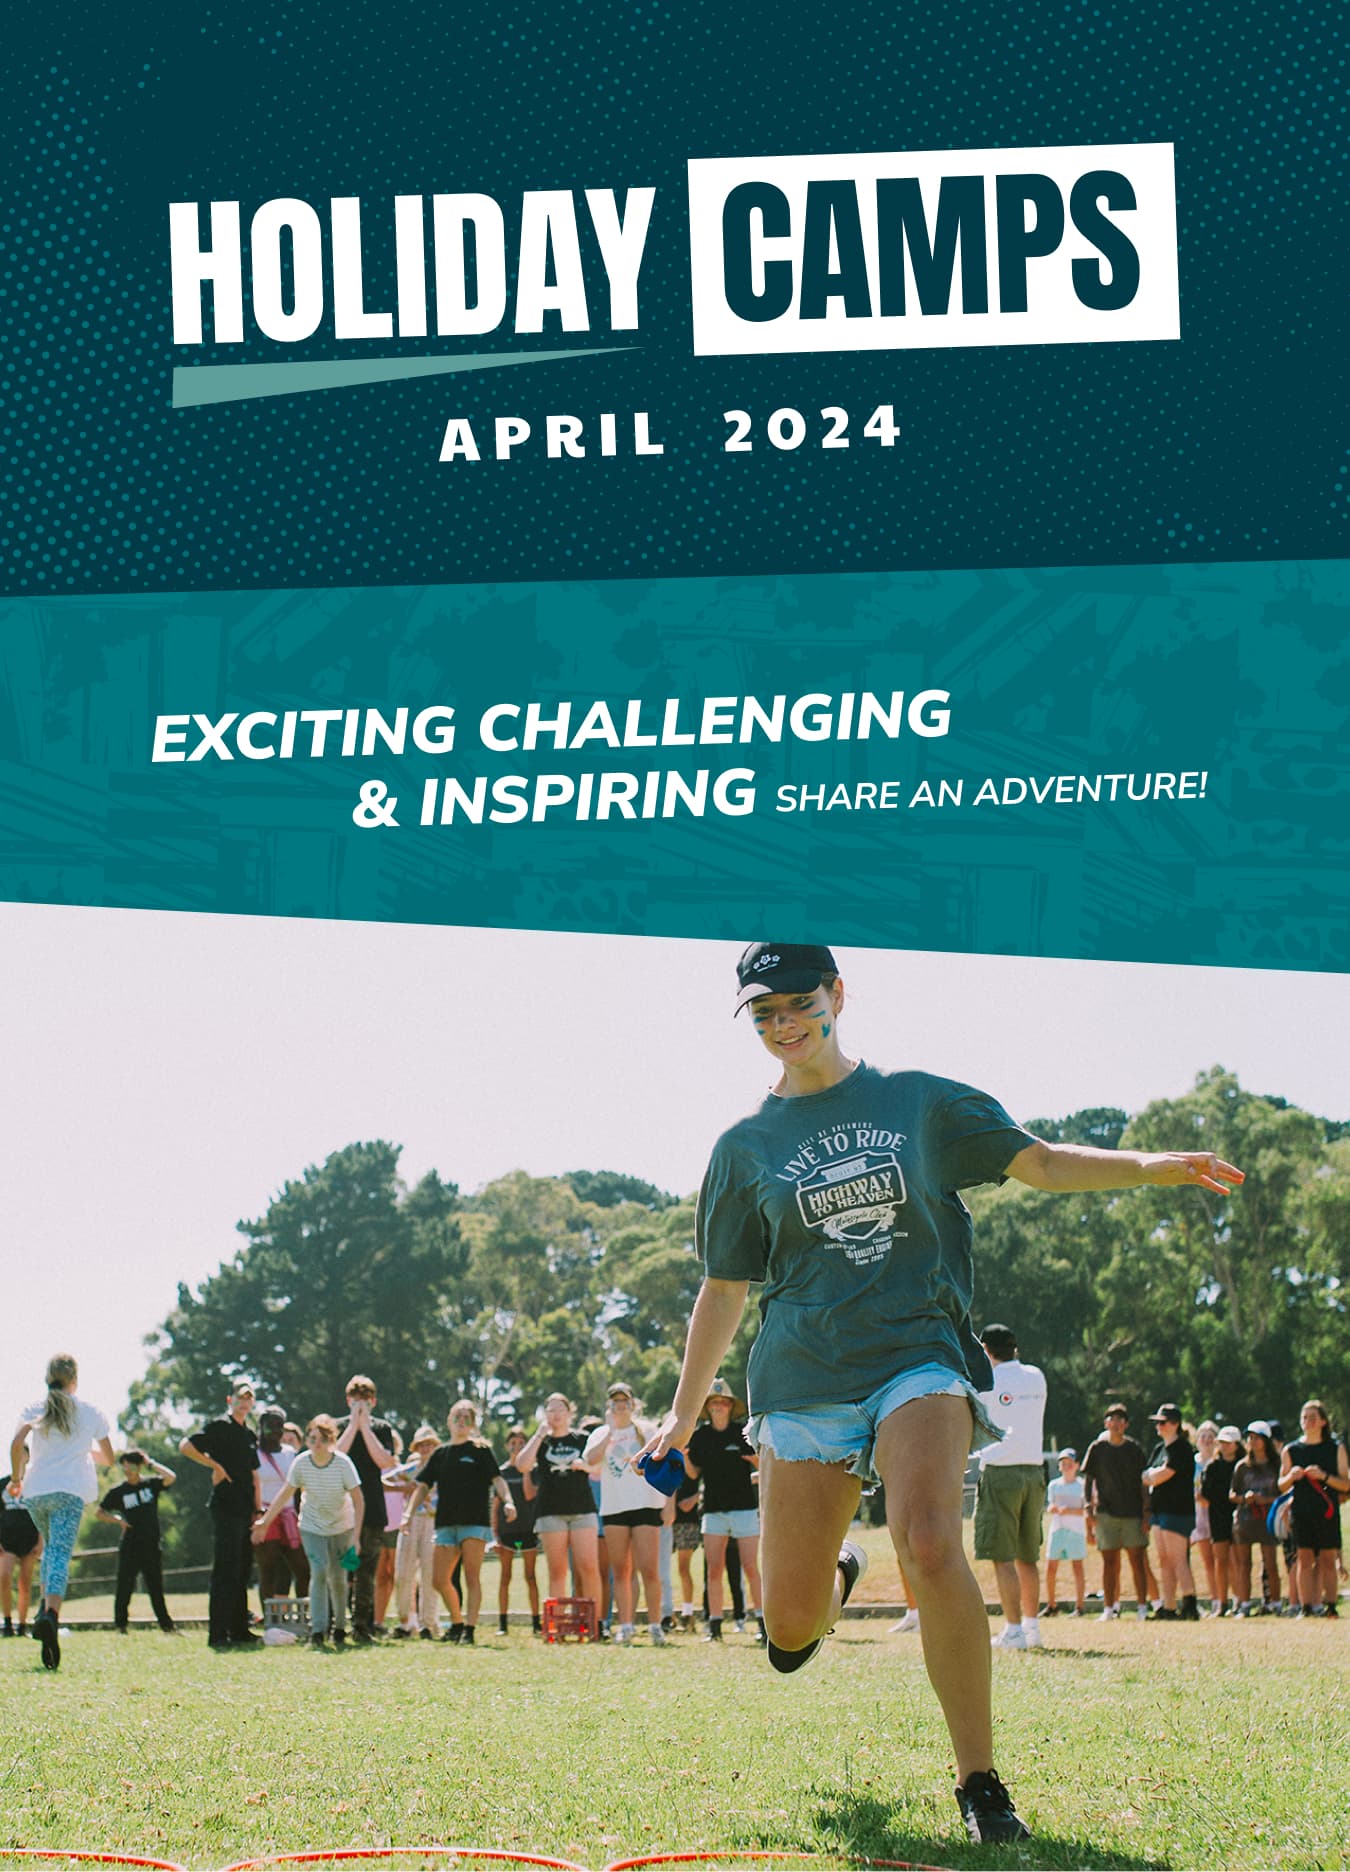 April Holiday camps web banner with holiday camps logo, April 2024 & the text EXCITING, CHALLENING, INSPIRING. Next to a girl with blue face paint playing field games at Holiday camps on the Mornington Peninsula - mobile